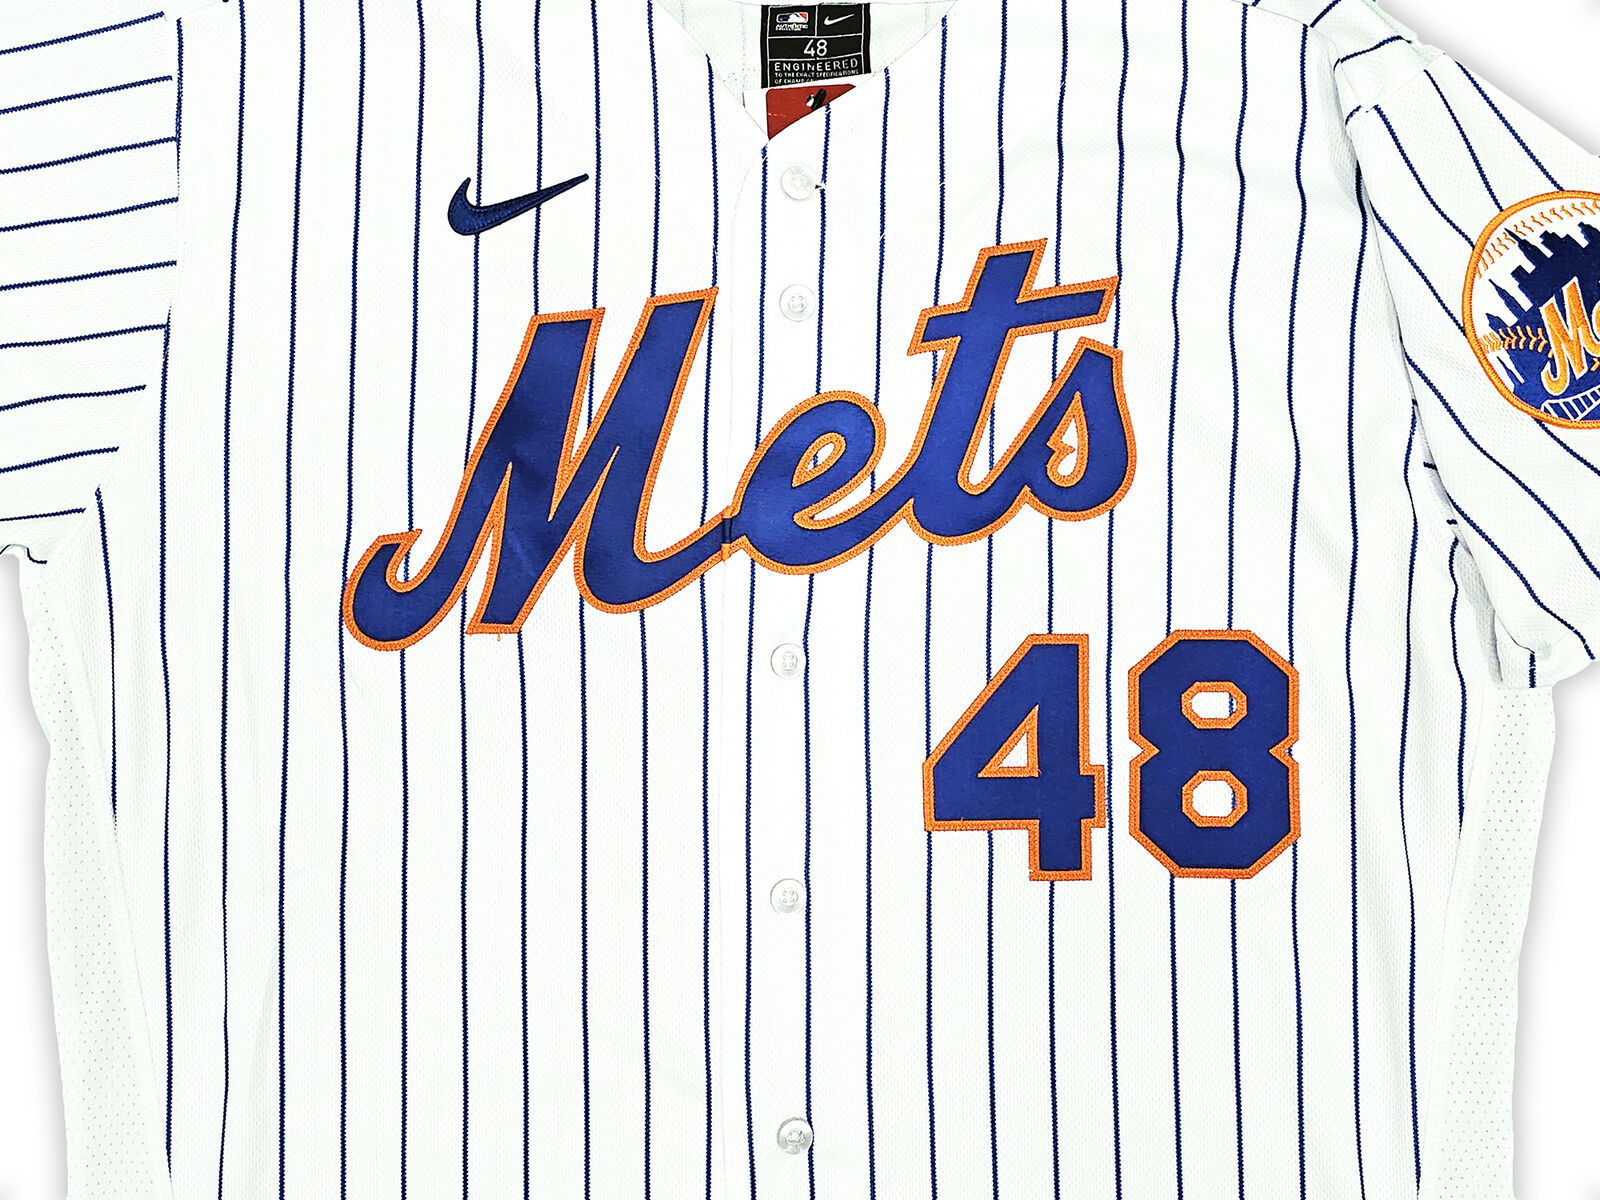 Jacob deGrom New York Mets Fanatics Authentic Autographed Nike